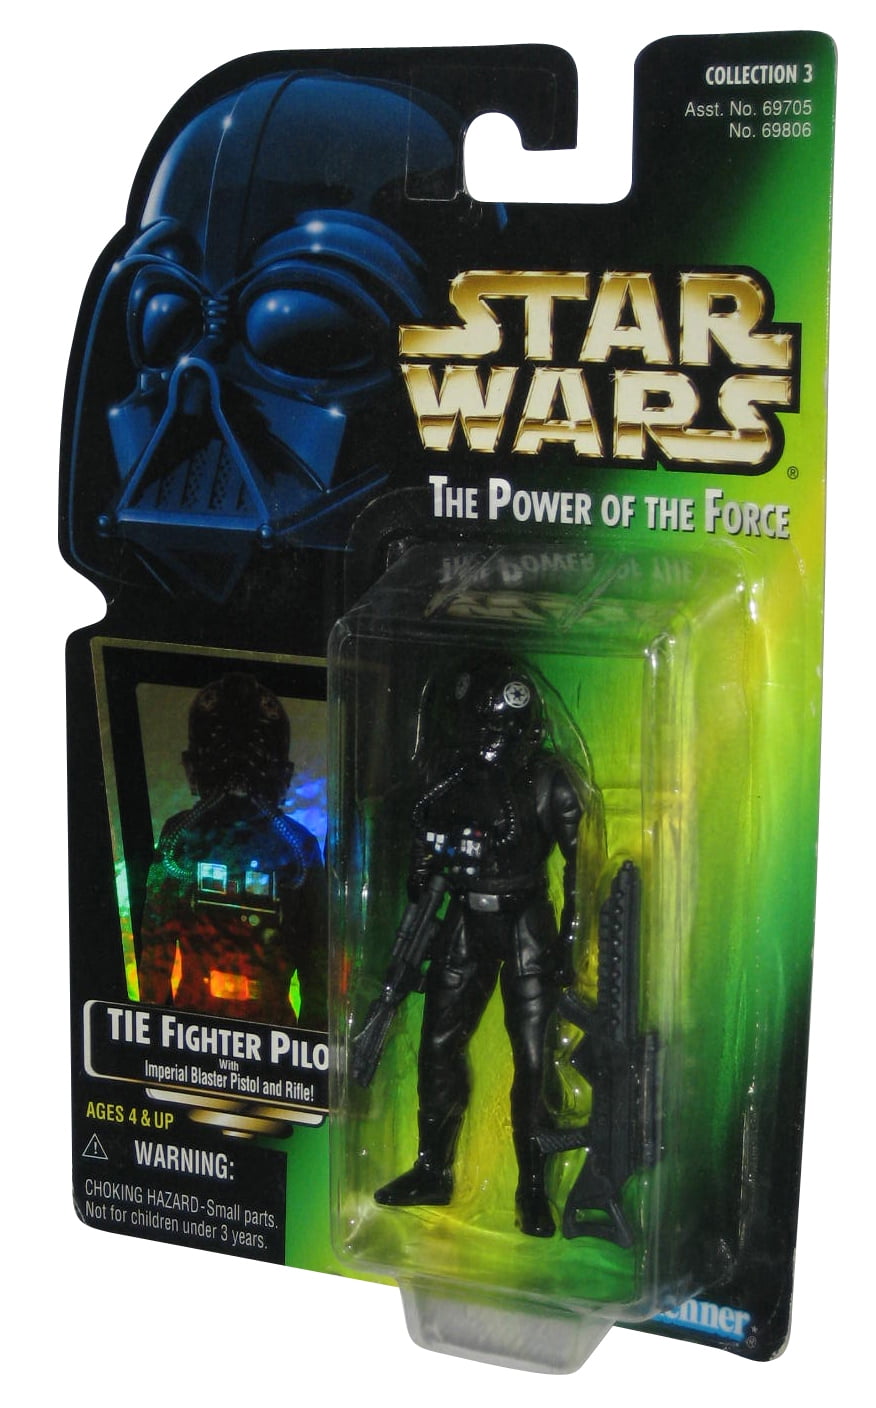 STAR WARS The Power of the Force TIE FIGHTER PILOT 3.75-Inch Action Figure NEW 